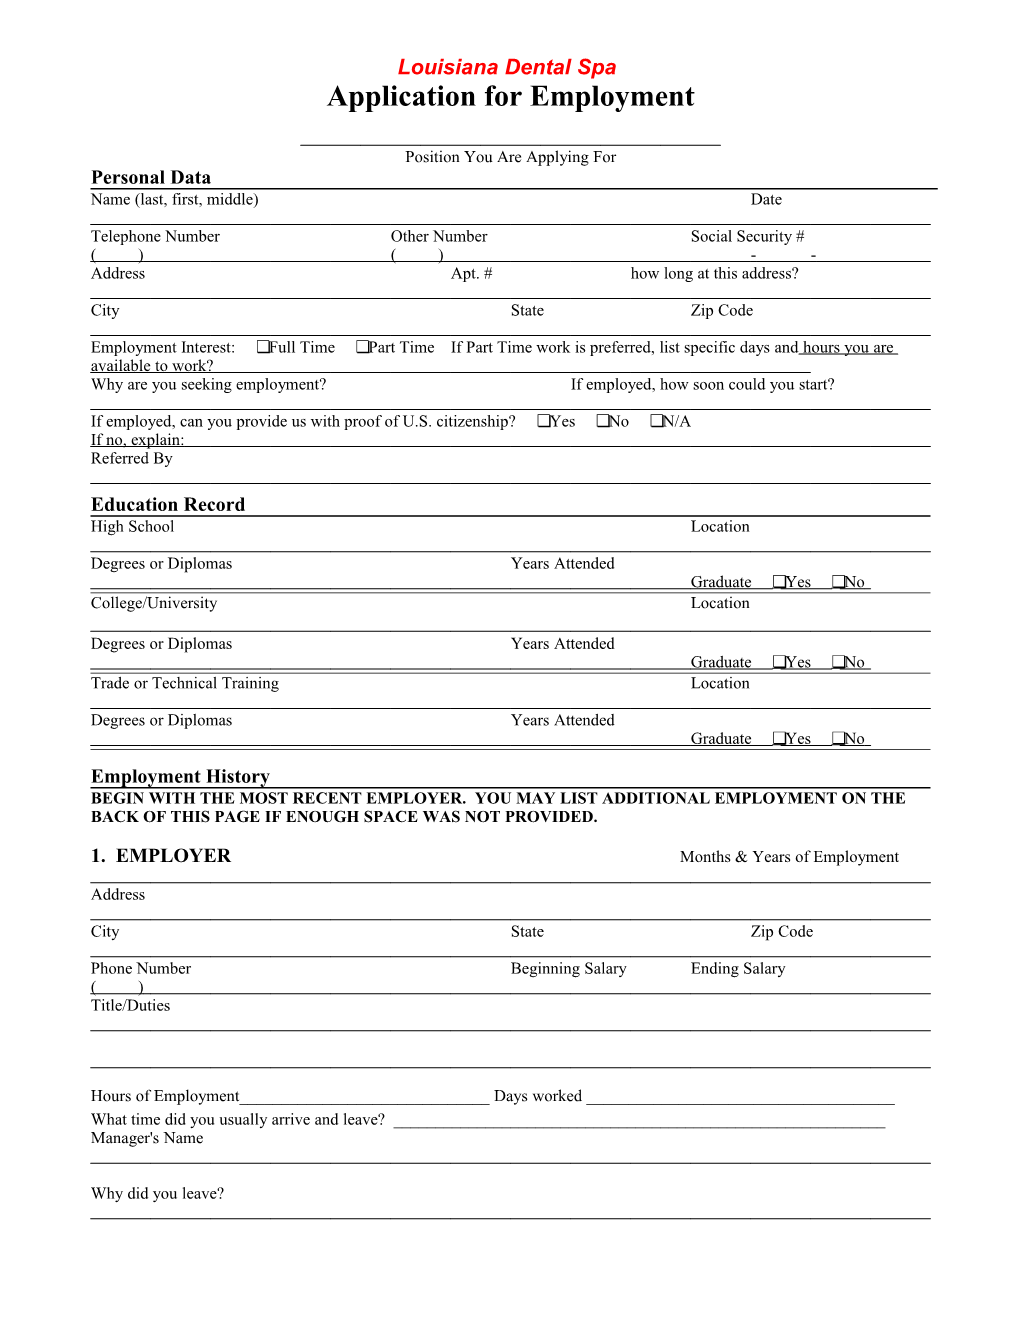 CPR Application for Employment